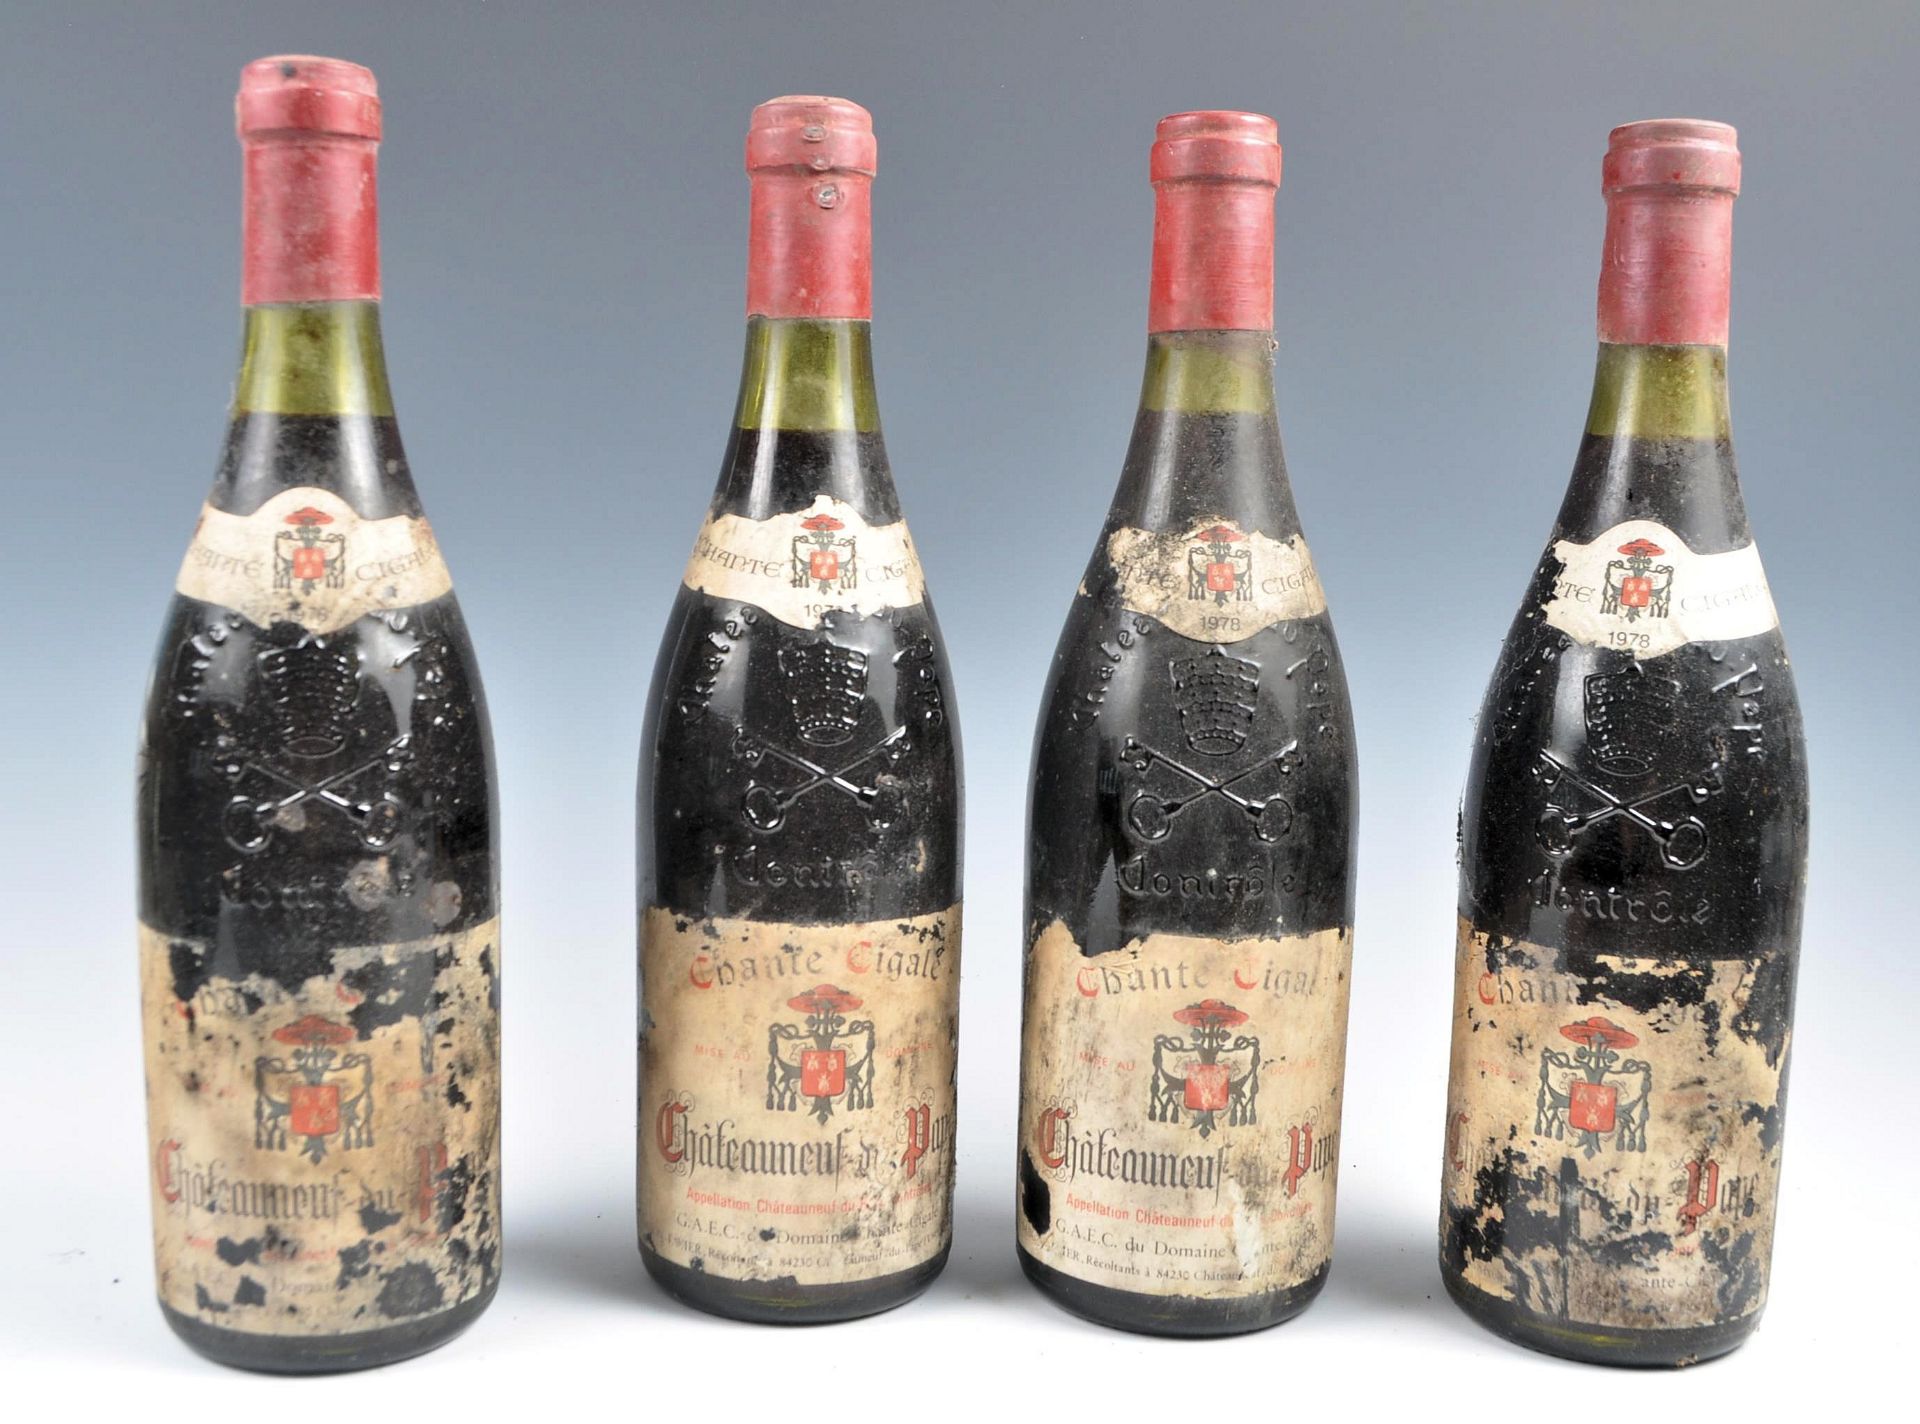 4 BOTTLES OF CHATEAUNEUF DU PAPE GRAND CIGALE MIS